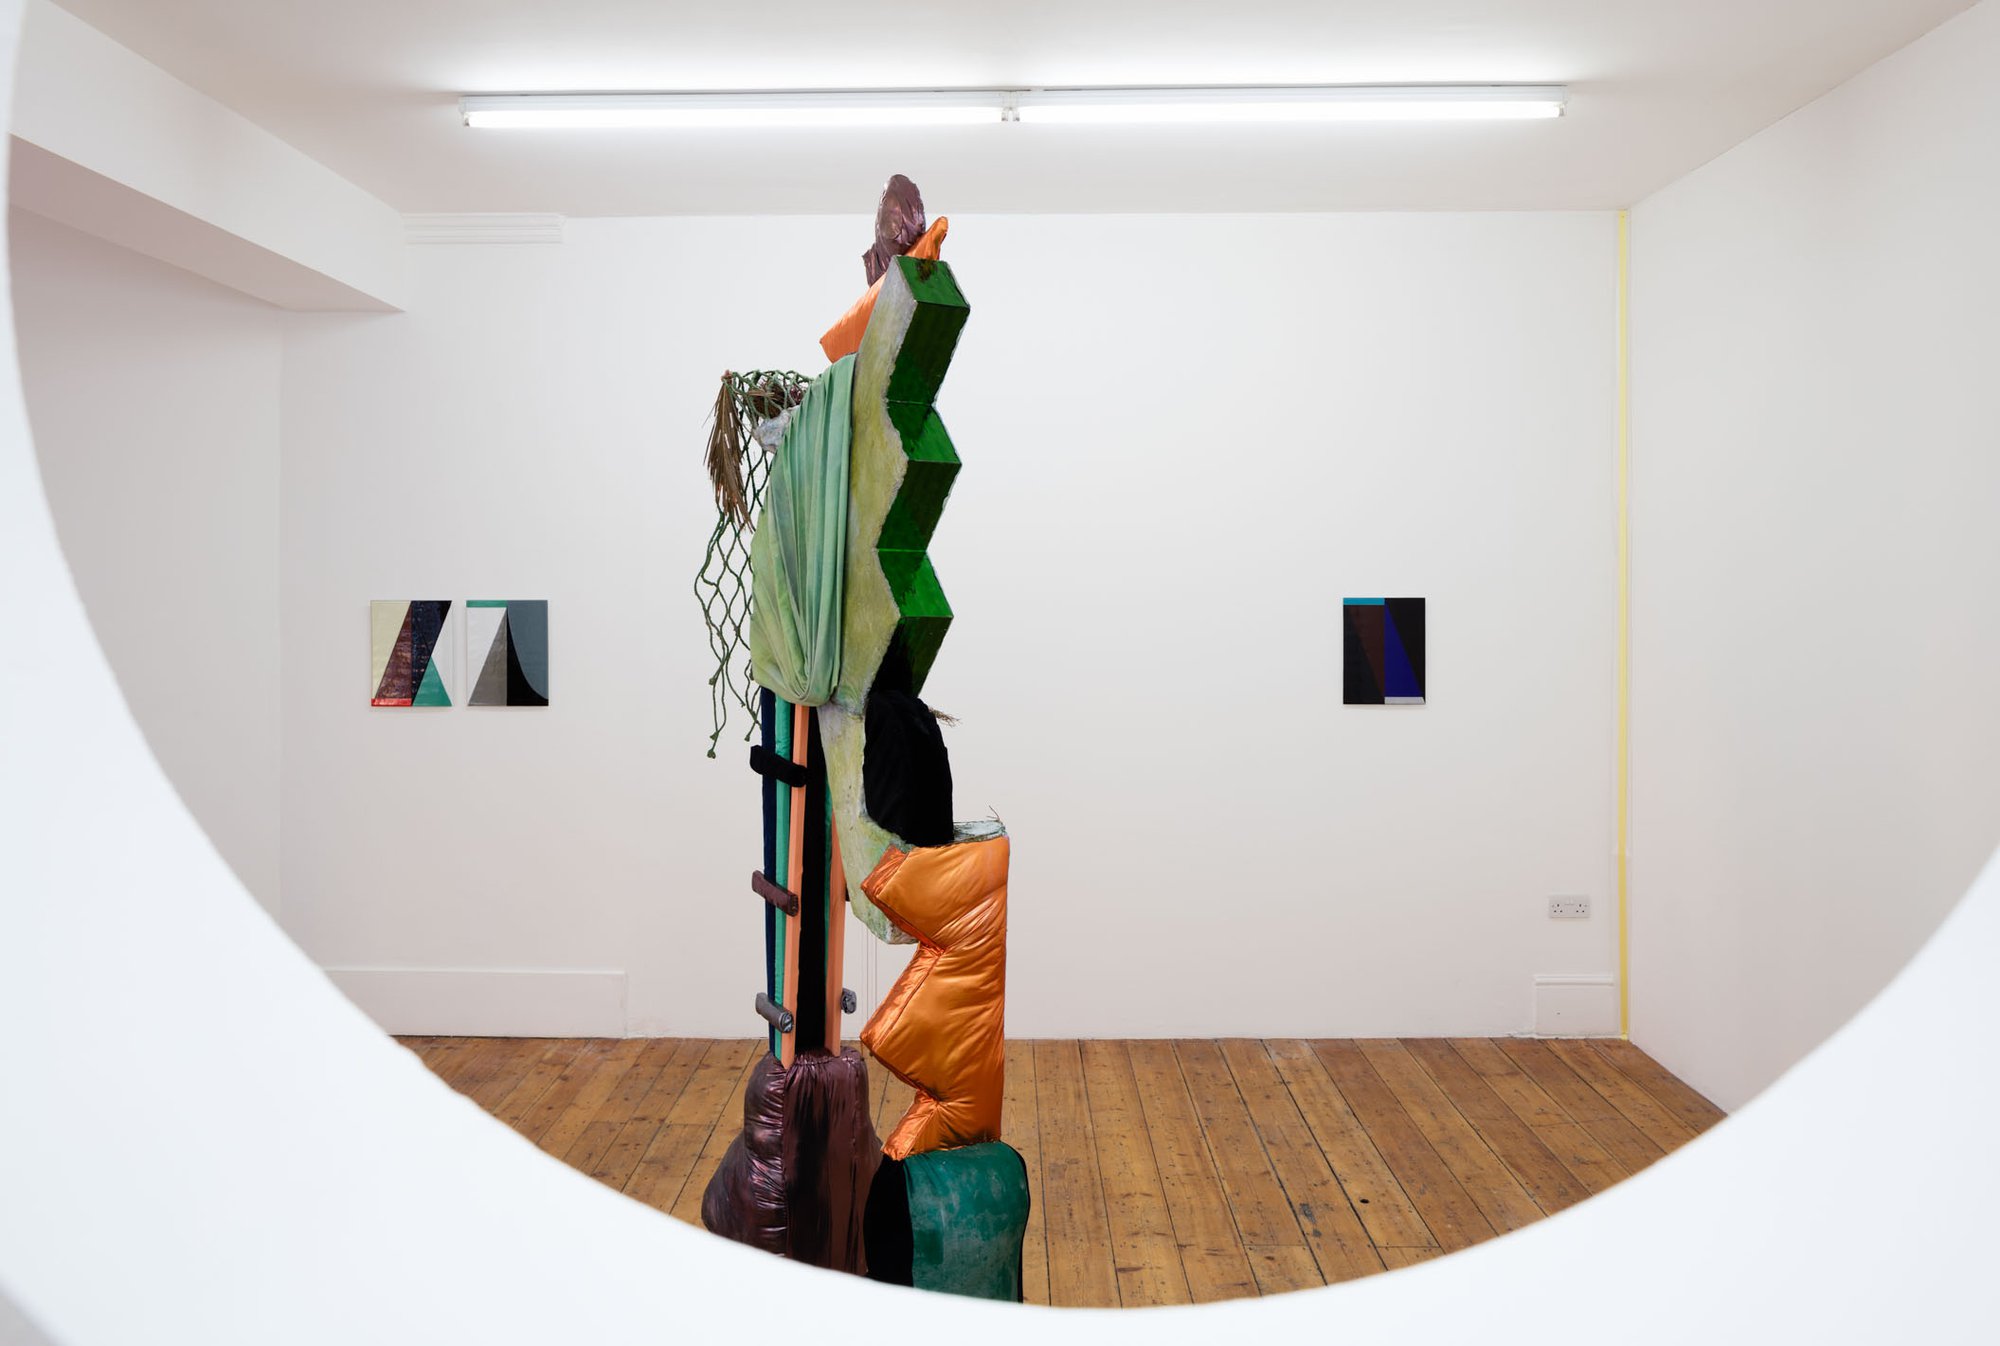 Installation view, Condo, Callicoon Fine Arts with Rodeo, London, 2016